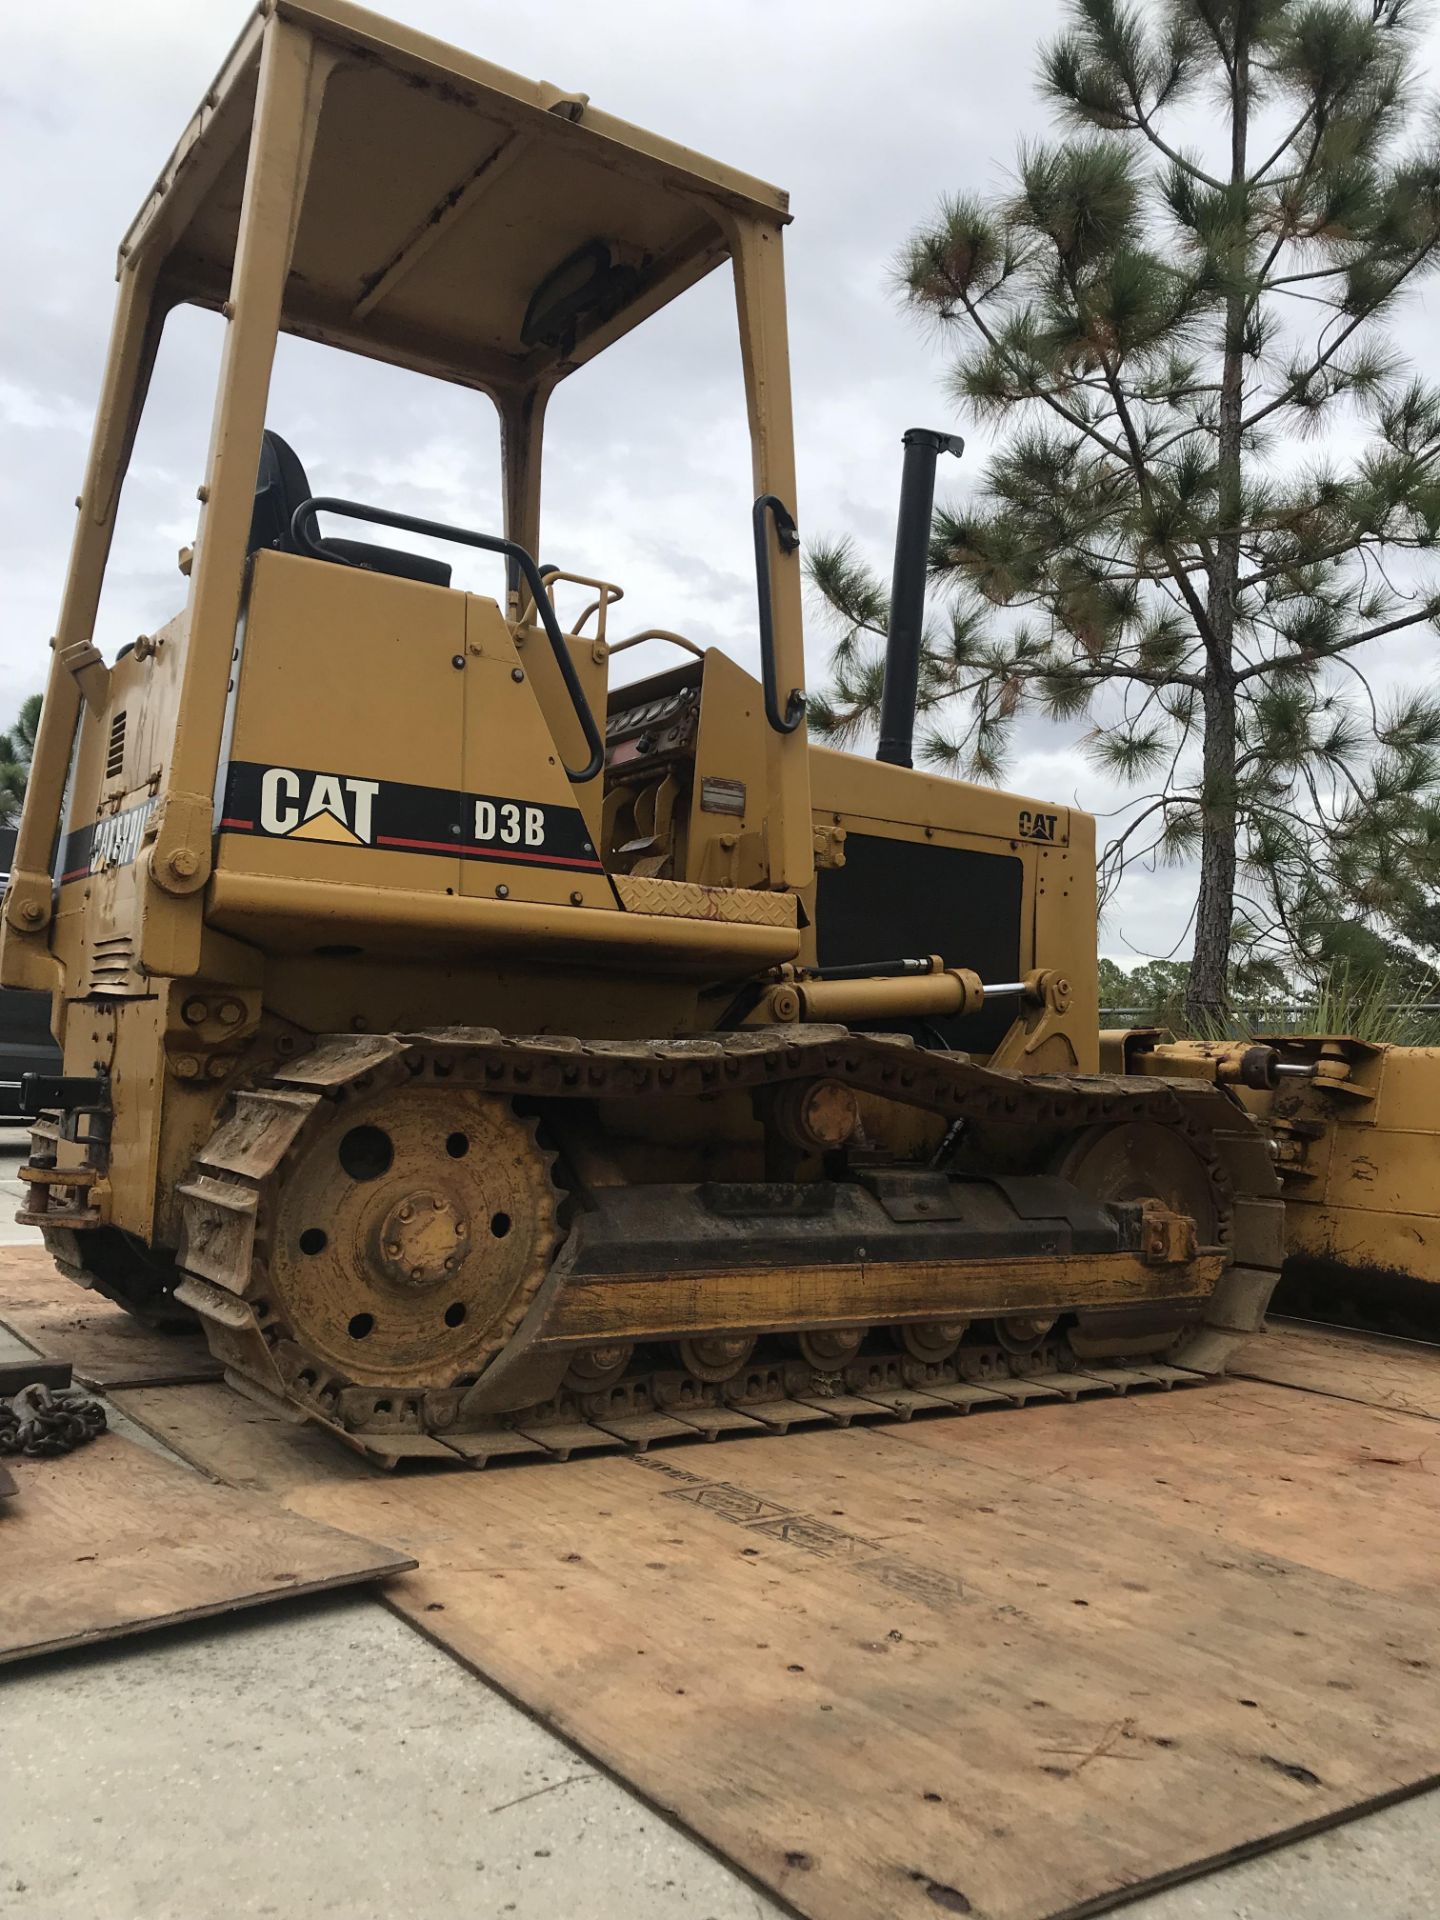 SEE VIDEO** CATERPILLAR D3B BULLDOZER W/ CANOPY, 4 CYLINDER DIESEL ENGINE, 16" METAL TRACKS - Image 2 of 7